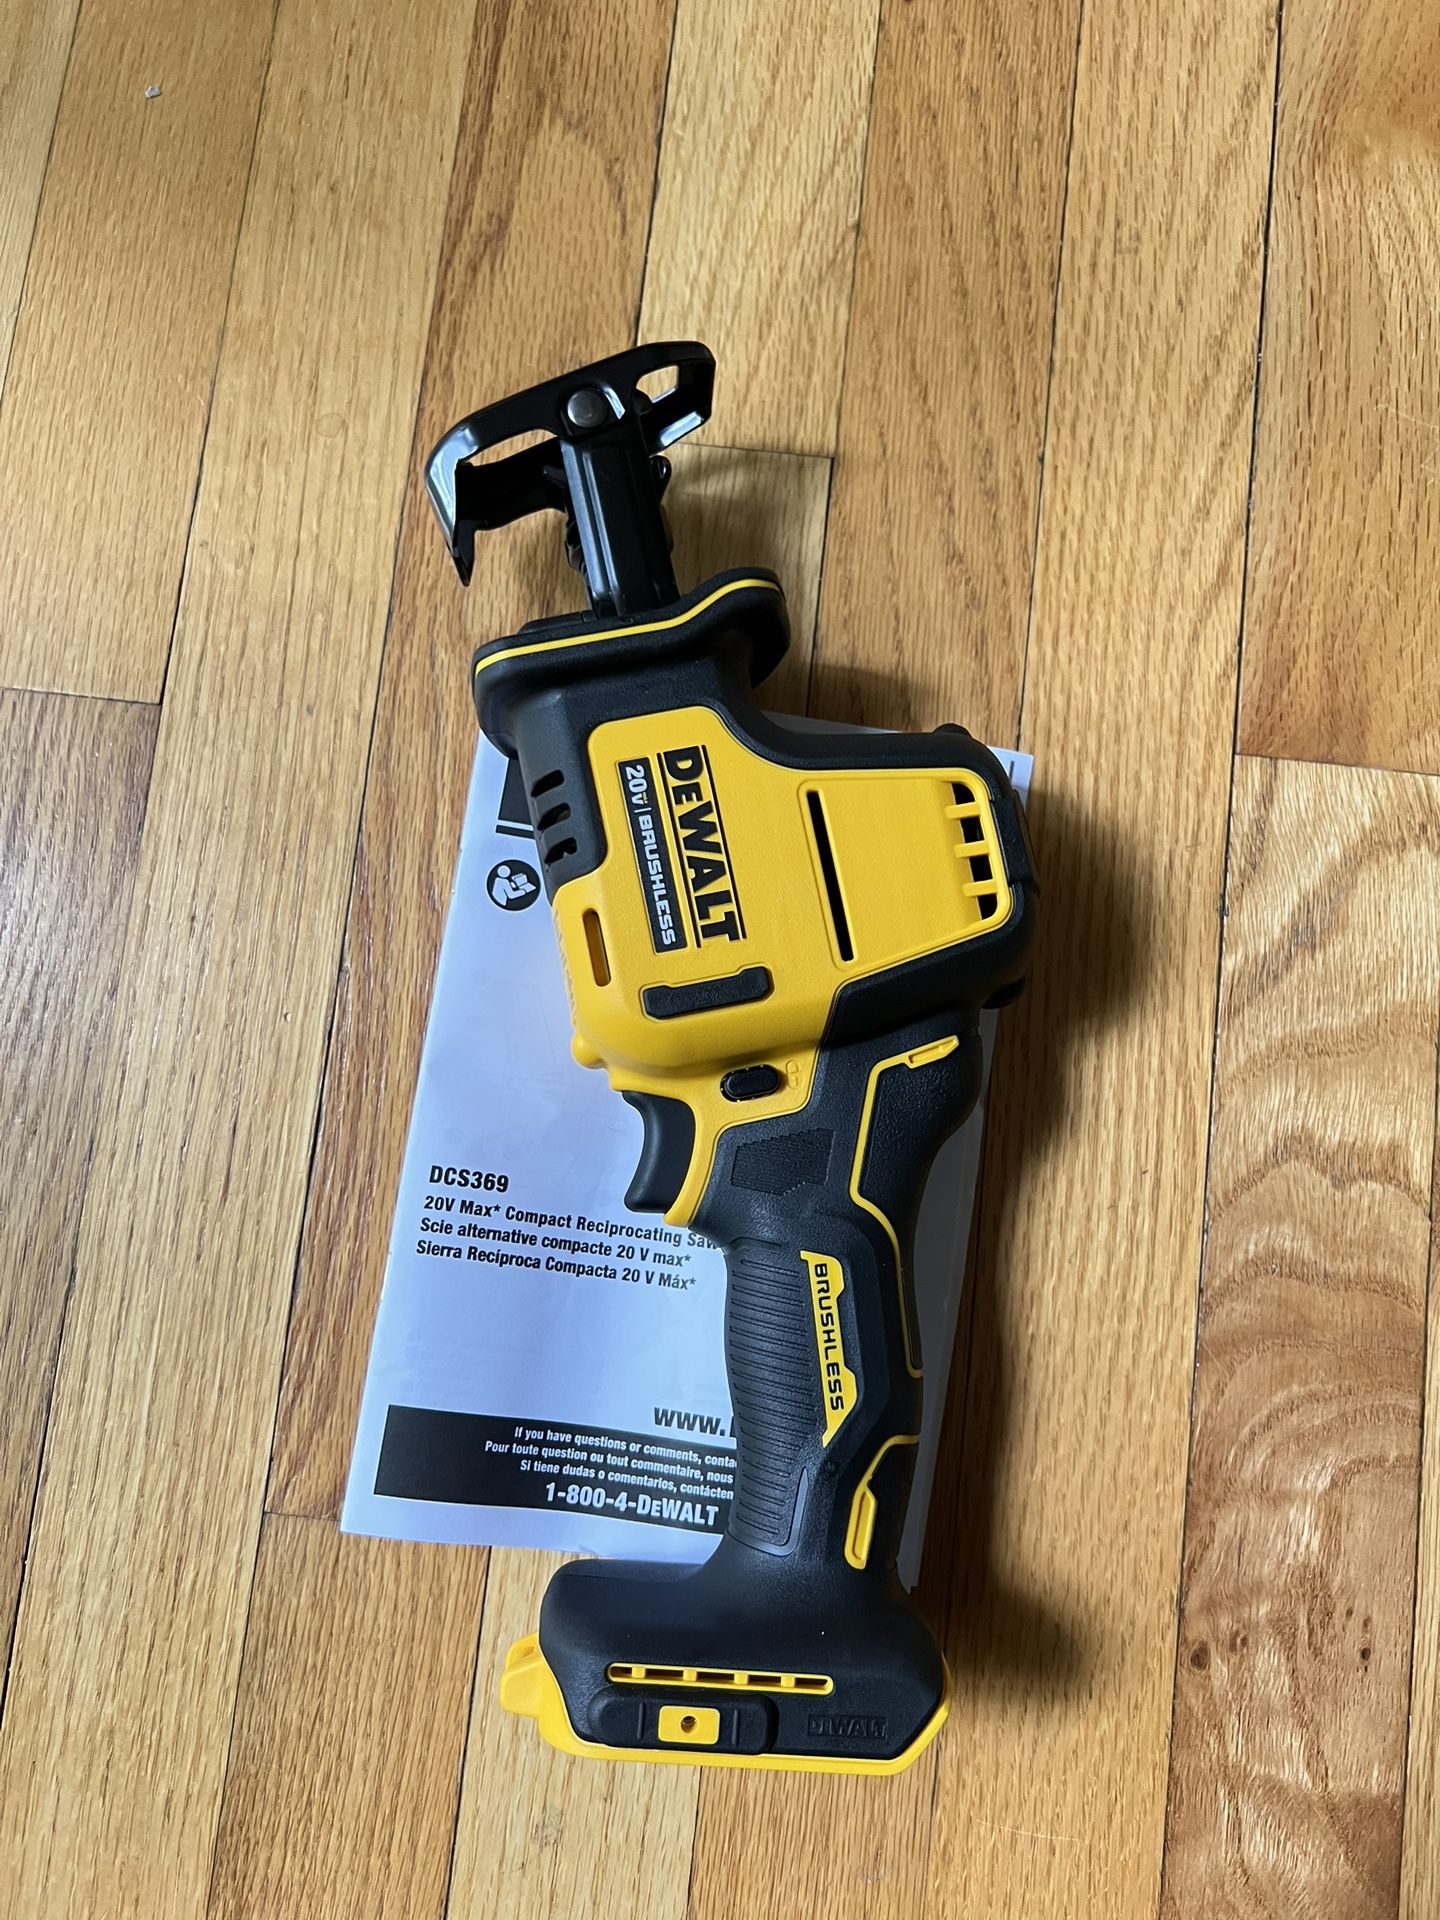 Dewalt 20V Brushless One-hand hackzall Reciprocating Saw (Tool Only)